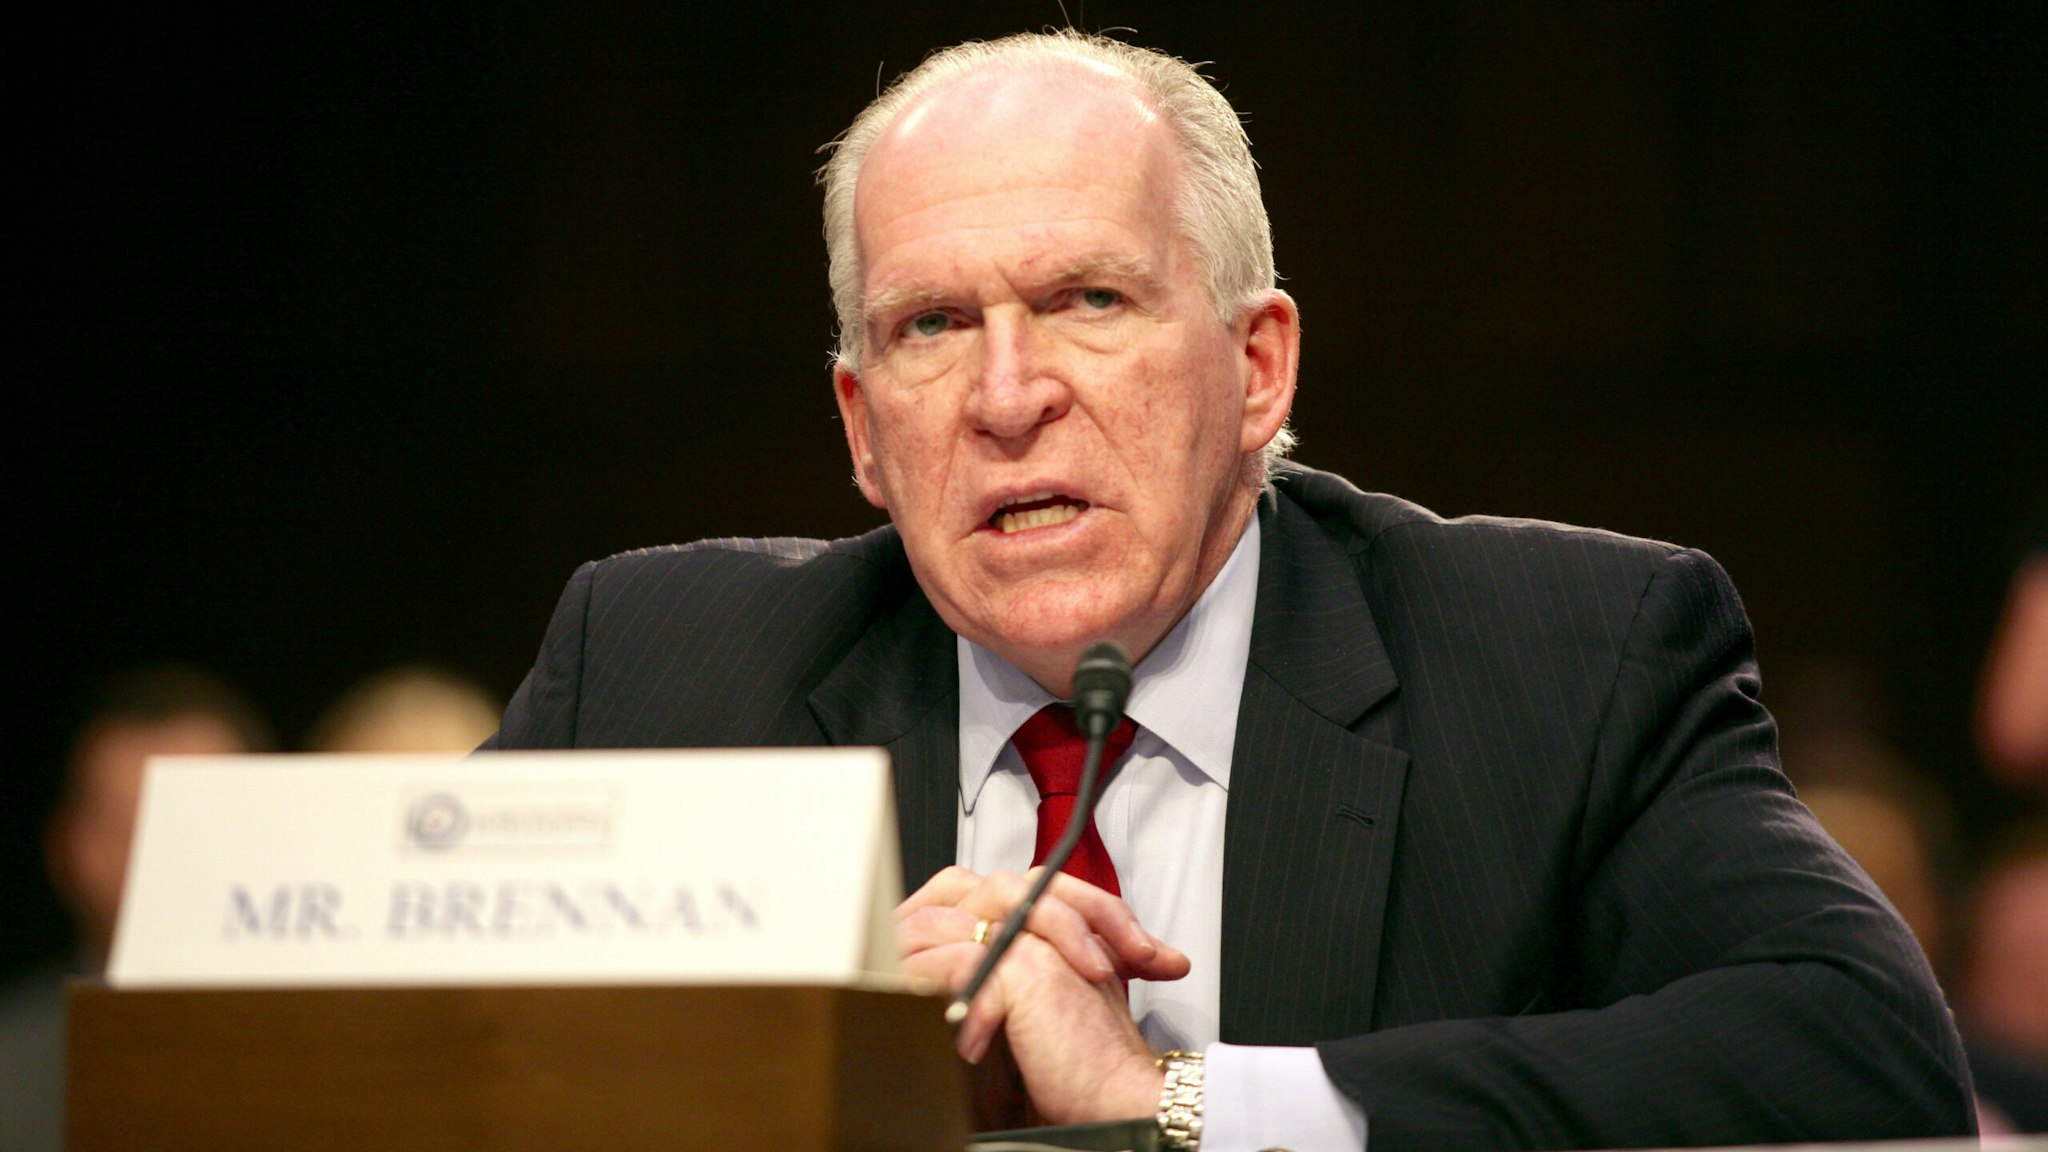 WASHINGTON, DC - JUNE 16: CIA Director John Brennan testifies during a Senate Committee hearing on national security on Capitol Hill June 16, 2016 in Washington, DC. Brennan said that despite gains on the battlefield, the West still faces a serious terror threat from ISIS.